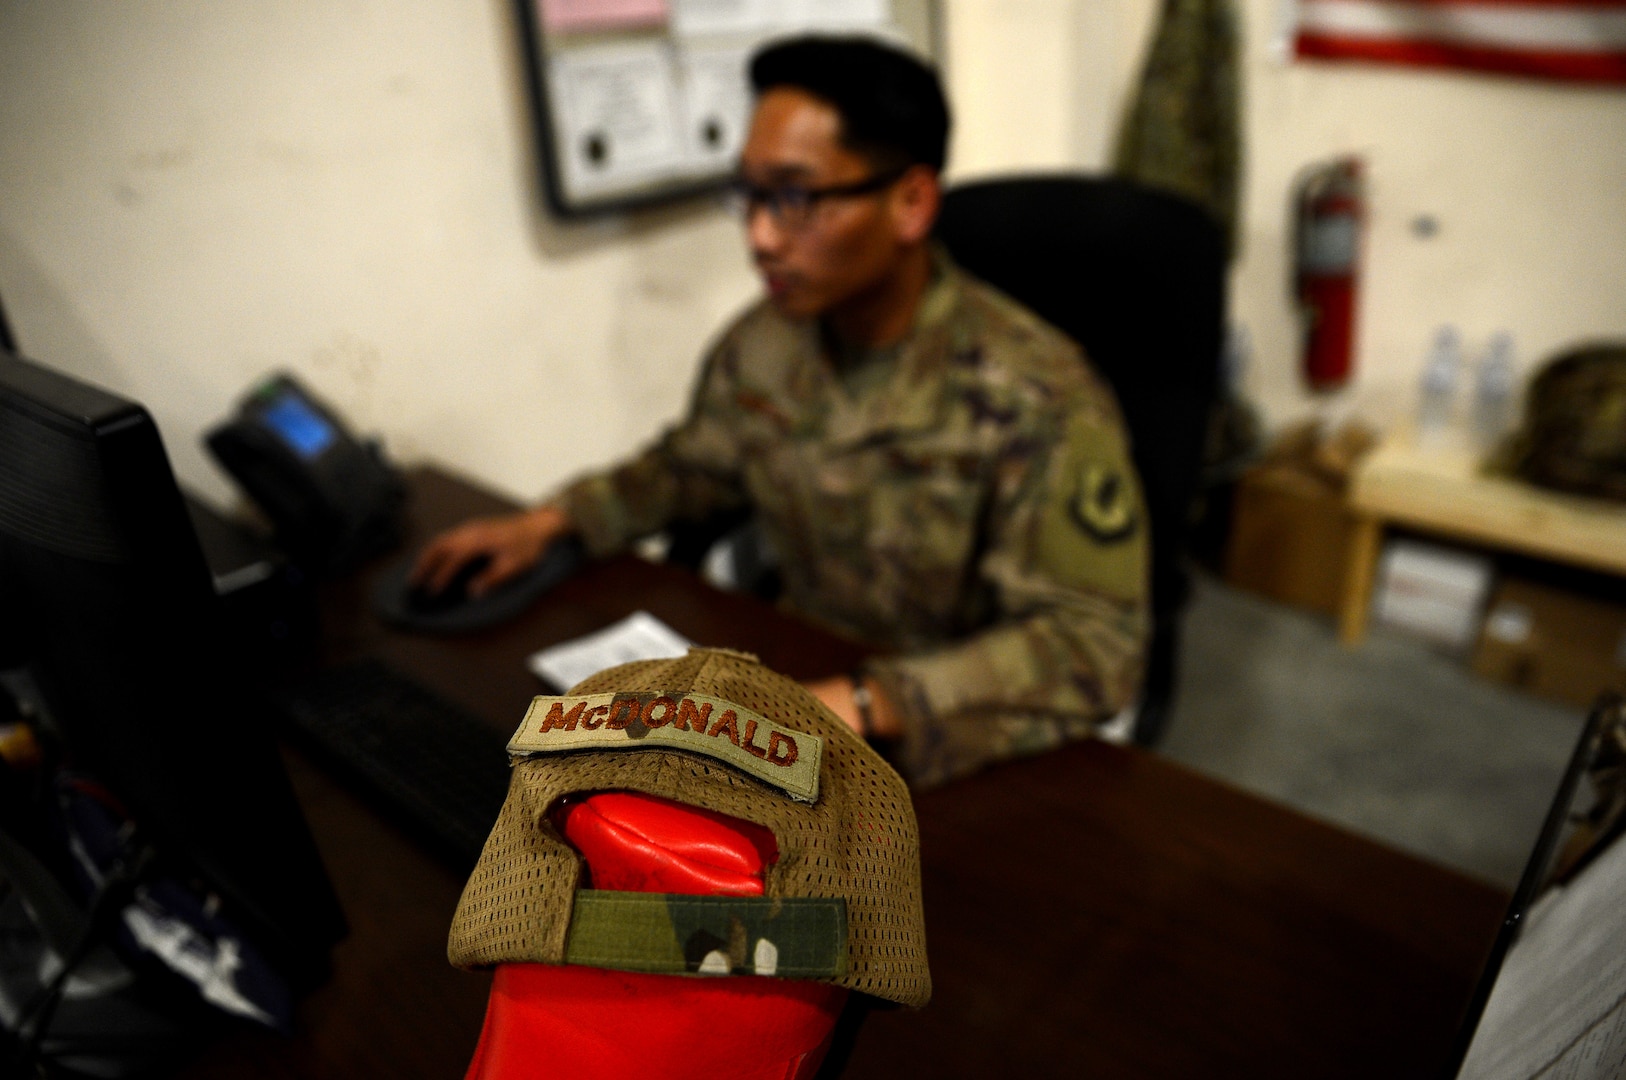 Staff Sgt. Josiah McDonald (left), 455th Expeditionary Logistic Readiness Squadron in-bound cargo NCOIC, and Senior Airman Trevis Pridgen (right), 455th ELRS traffic management technician, lay dunnage for cargo Mar. 16, 2018 at Bagram Airfield, Afghanistan.